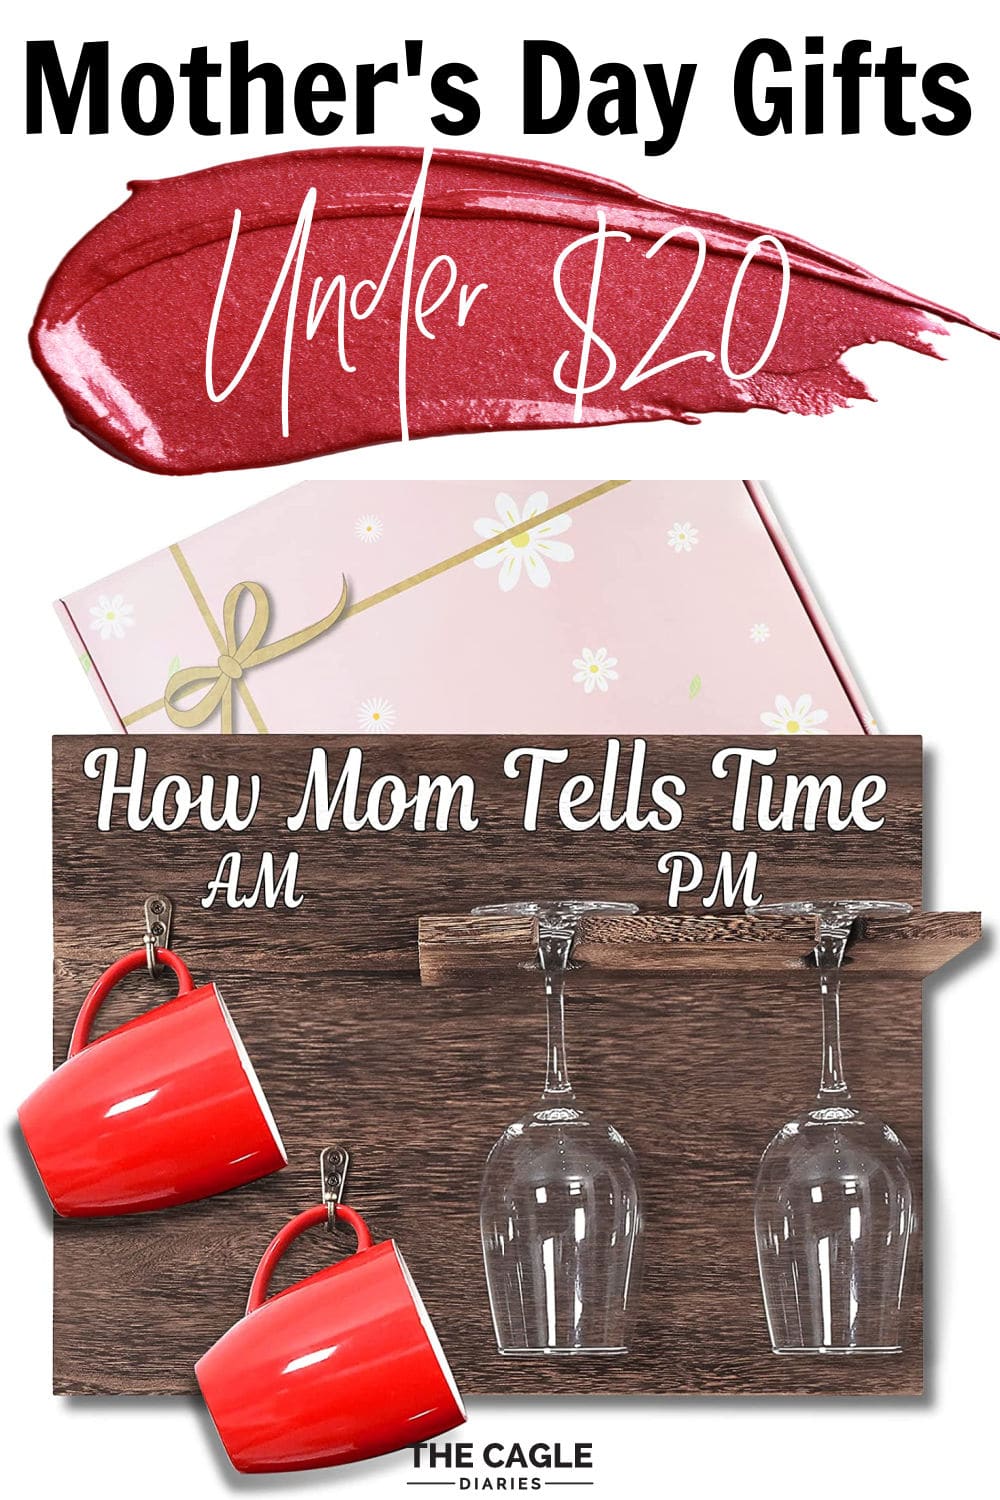 Gifts under $20 - Everyday Mrs